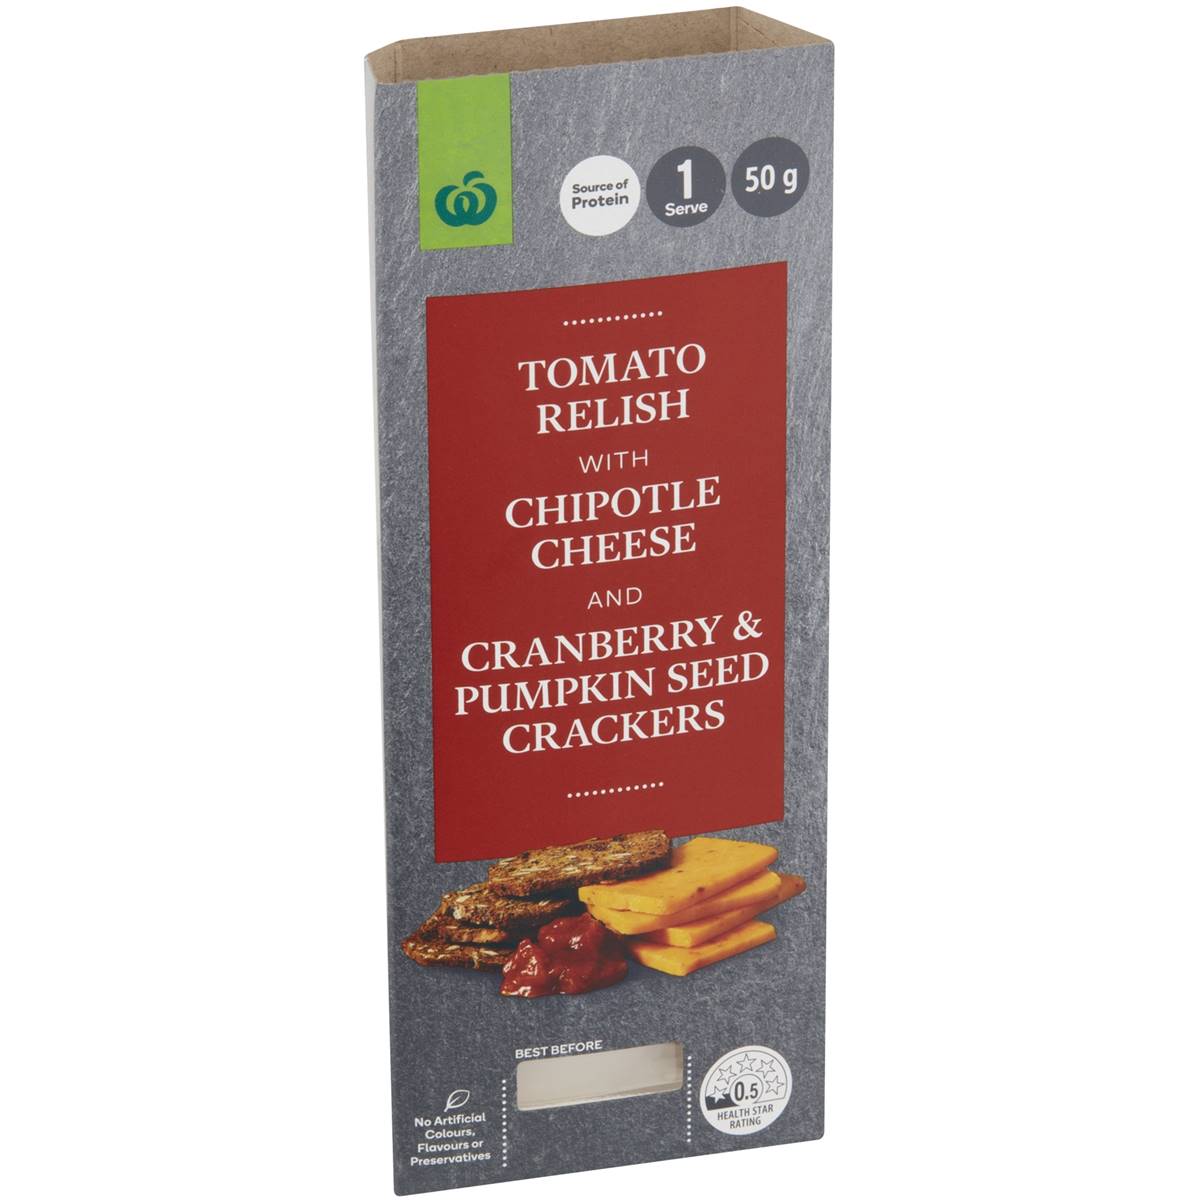 Calories in Woolworths Chipotle Cheese, Tomato Relish & Artisan Crackers